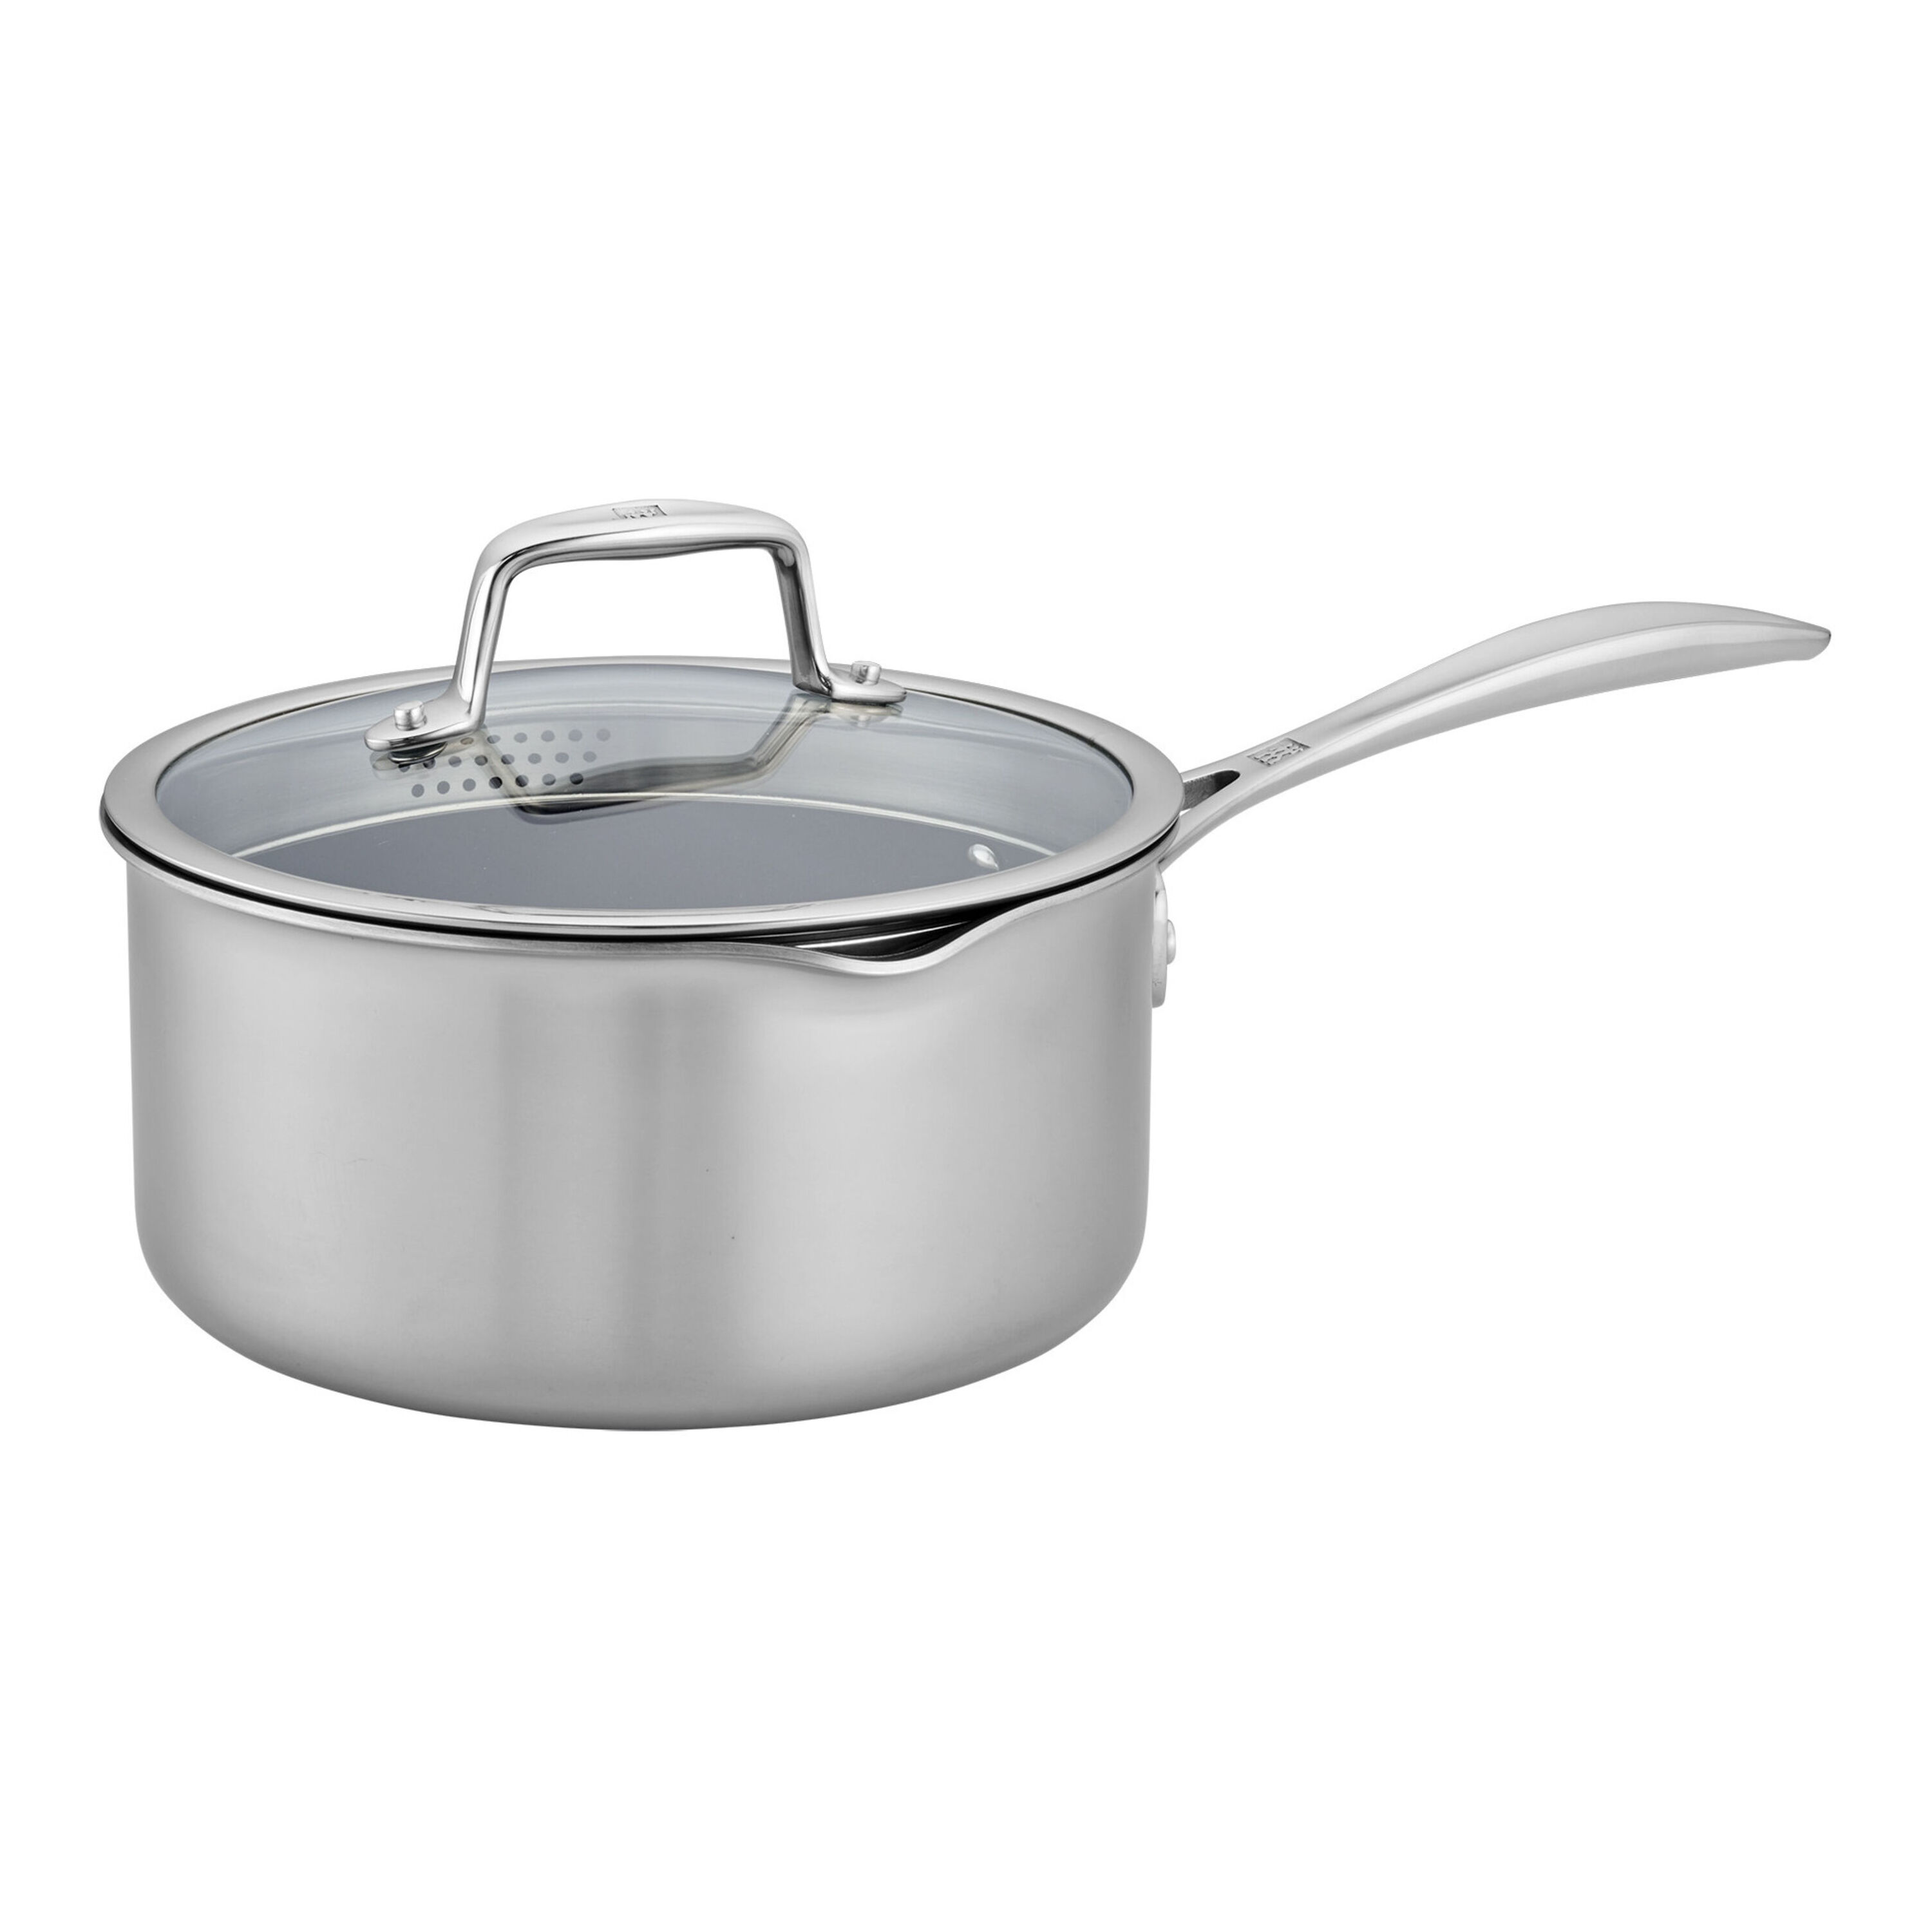 DELUXE Sauce Pan with Lid, 3 Quart 3-Ply Stainless Steel Saucepan with  Stay-Cool Handle, Multipurpose Cooking Pot for Sauces Pasta,Suitable